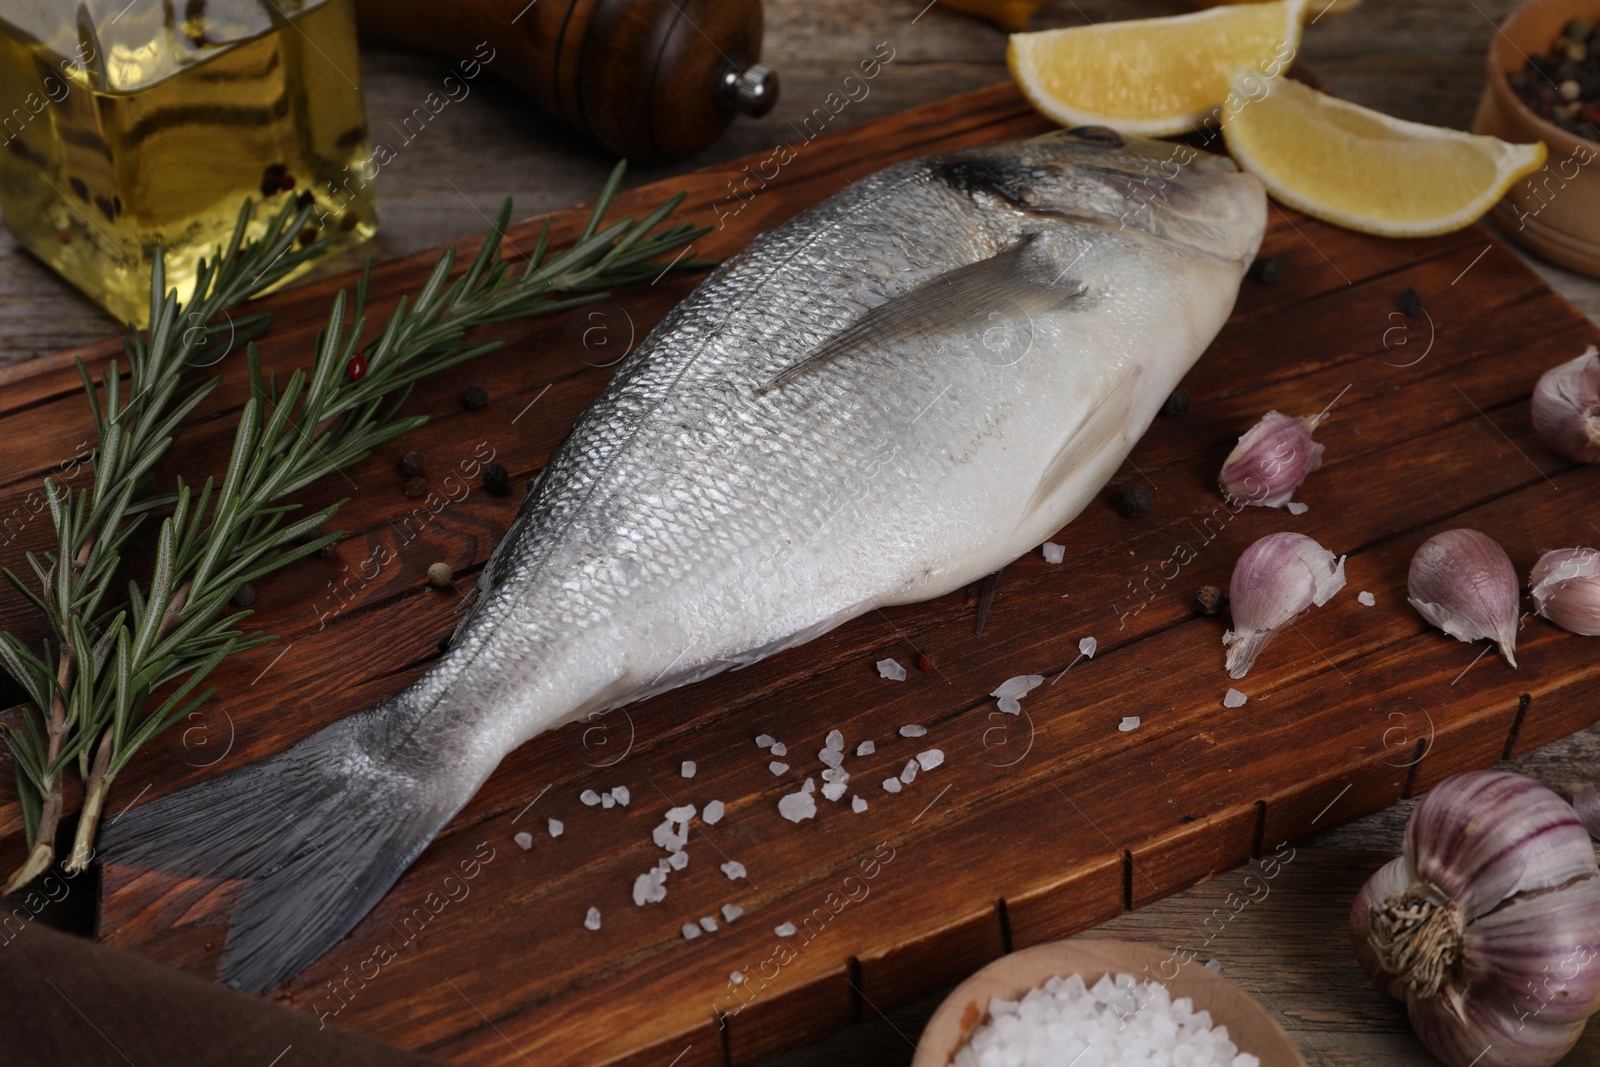 Photo of Raw dorado fish, lemon wedges and spices on wooden table